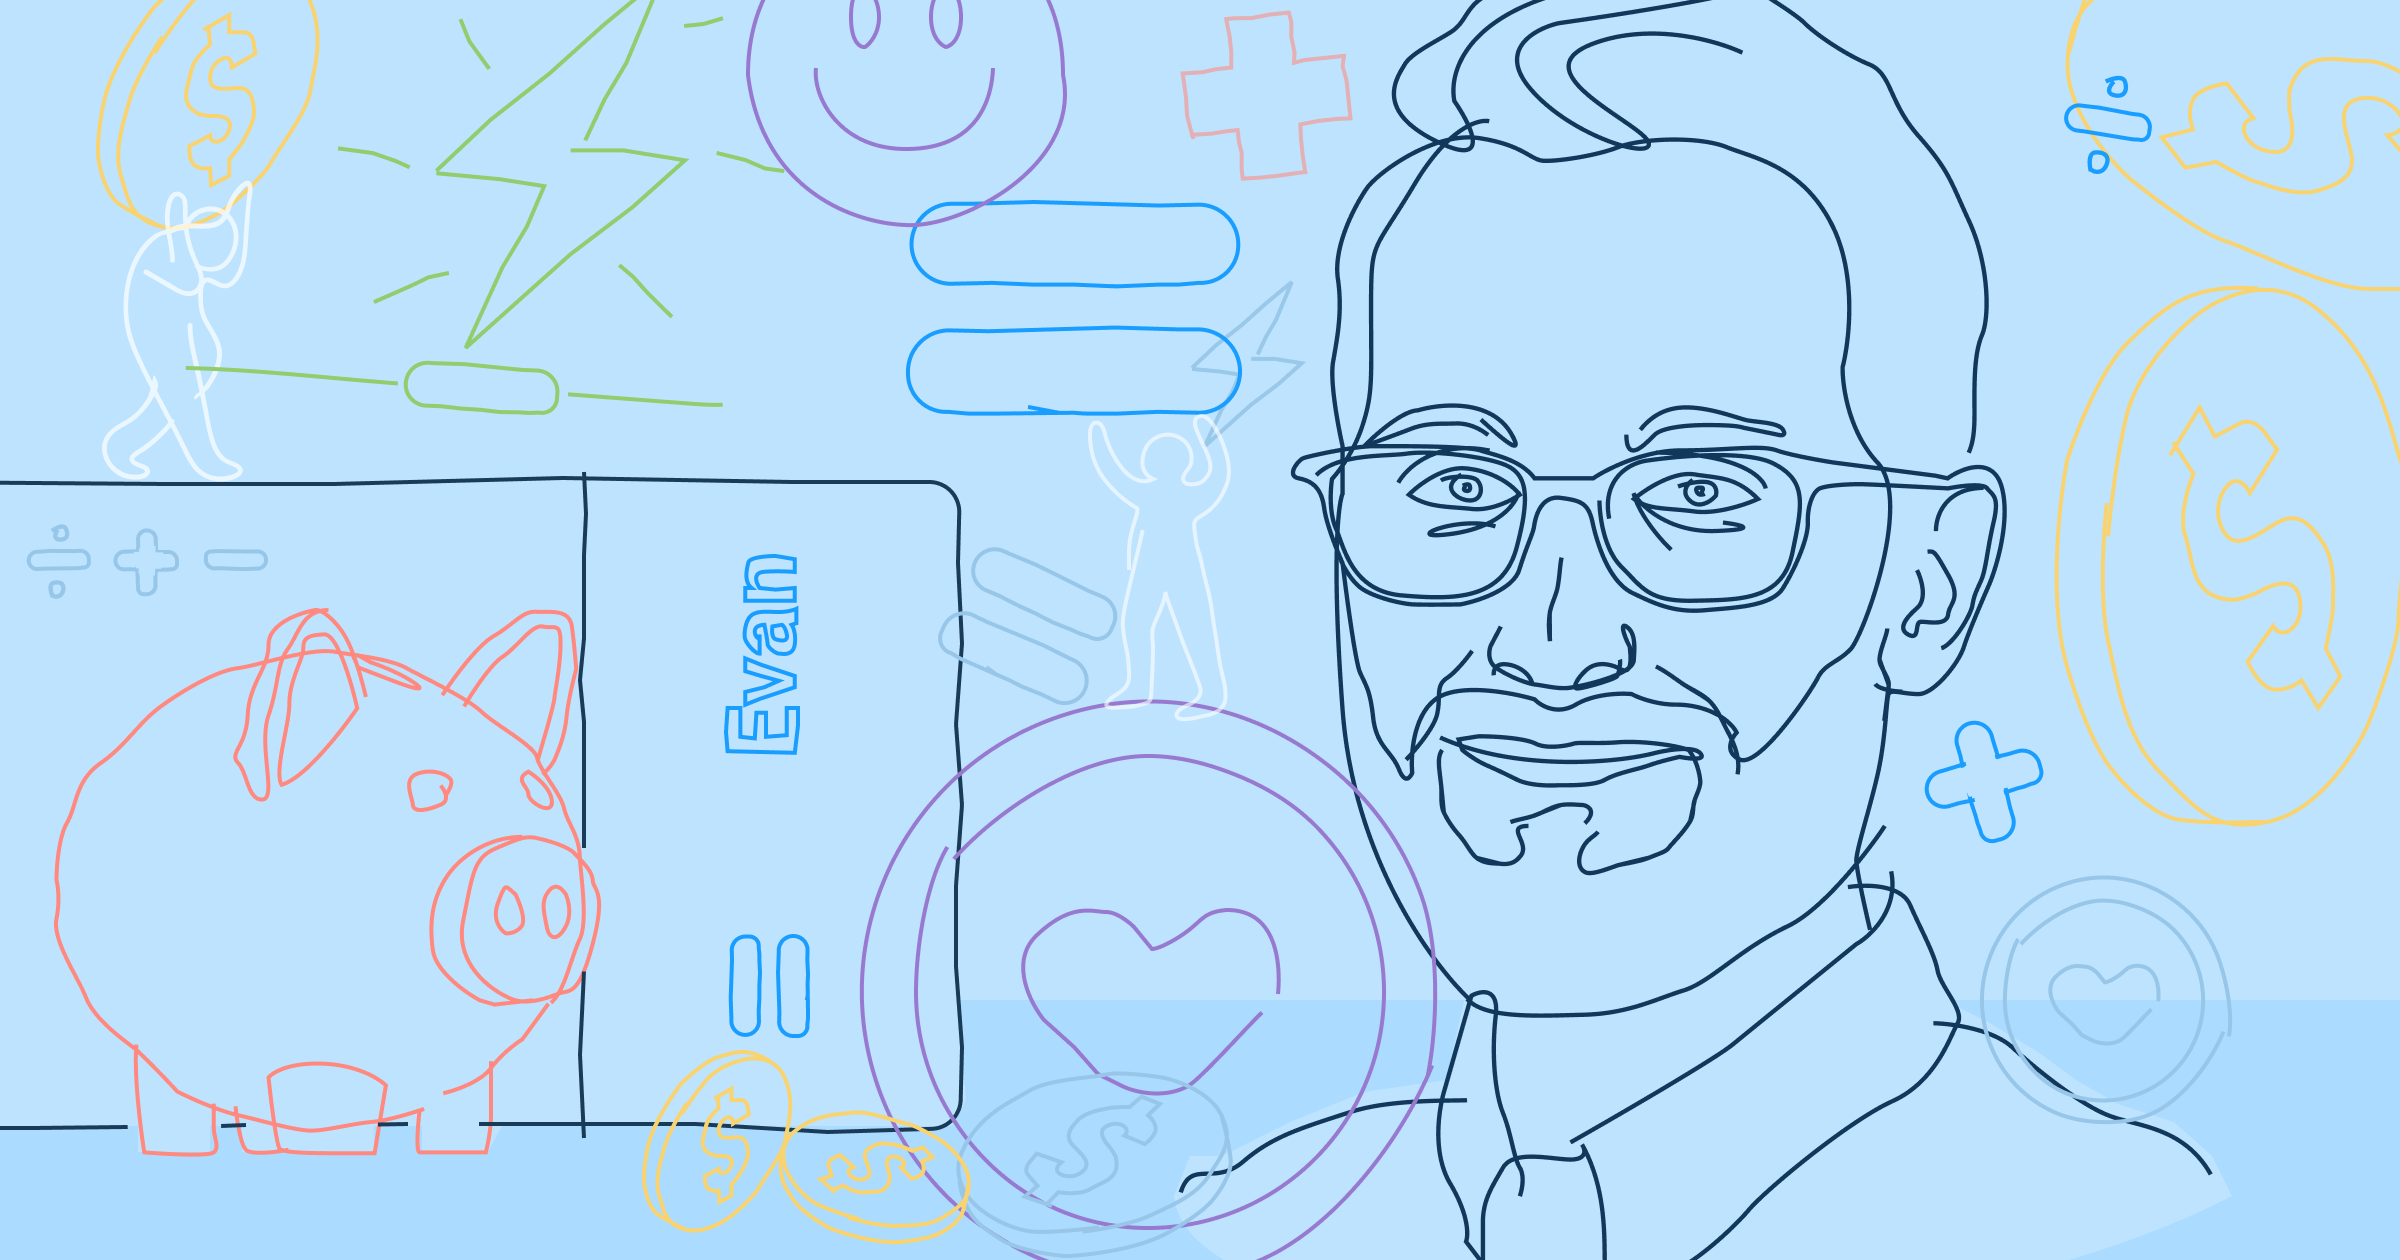 An illustration of a man with a beard and glasses, with artistic renderings of a piggy bank, mathematical signs, and the Even logo.